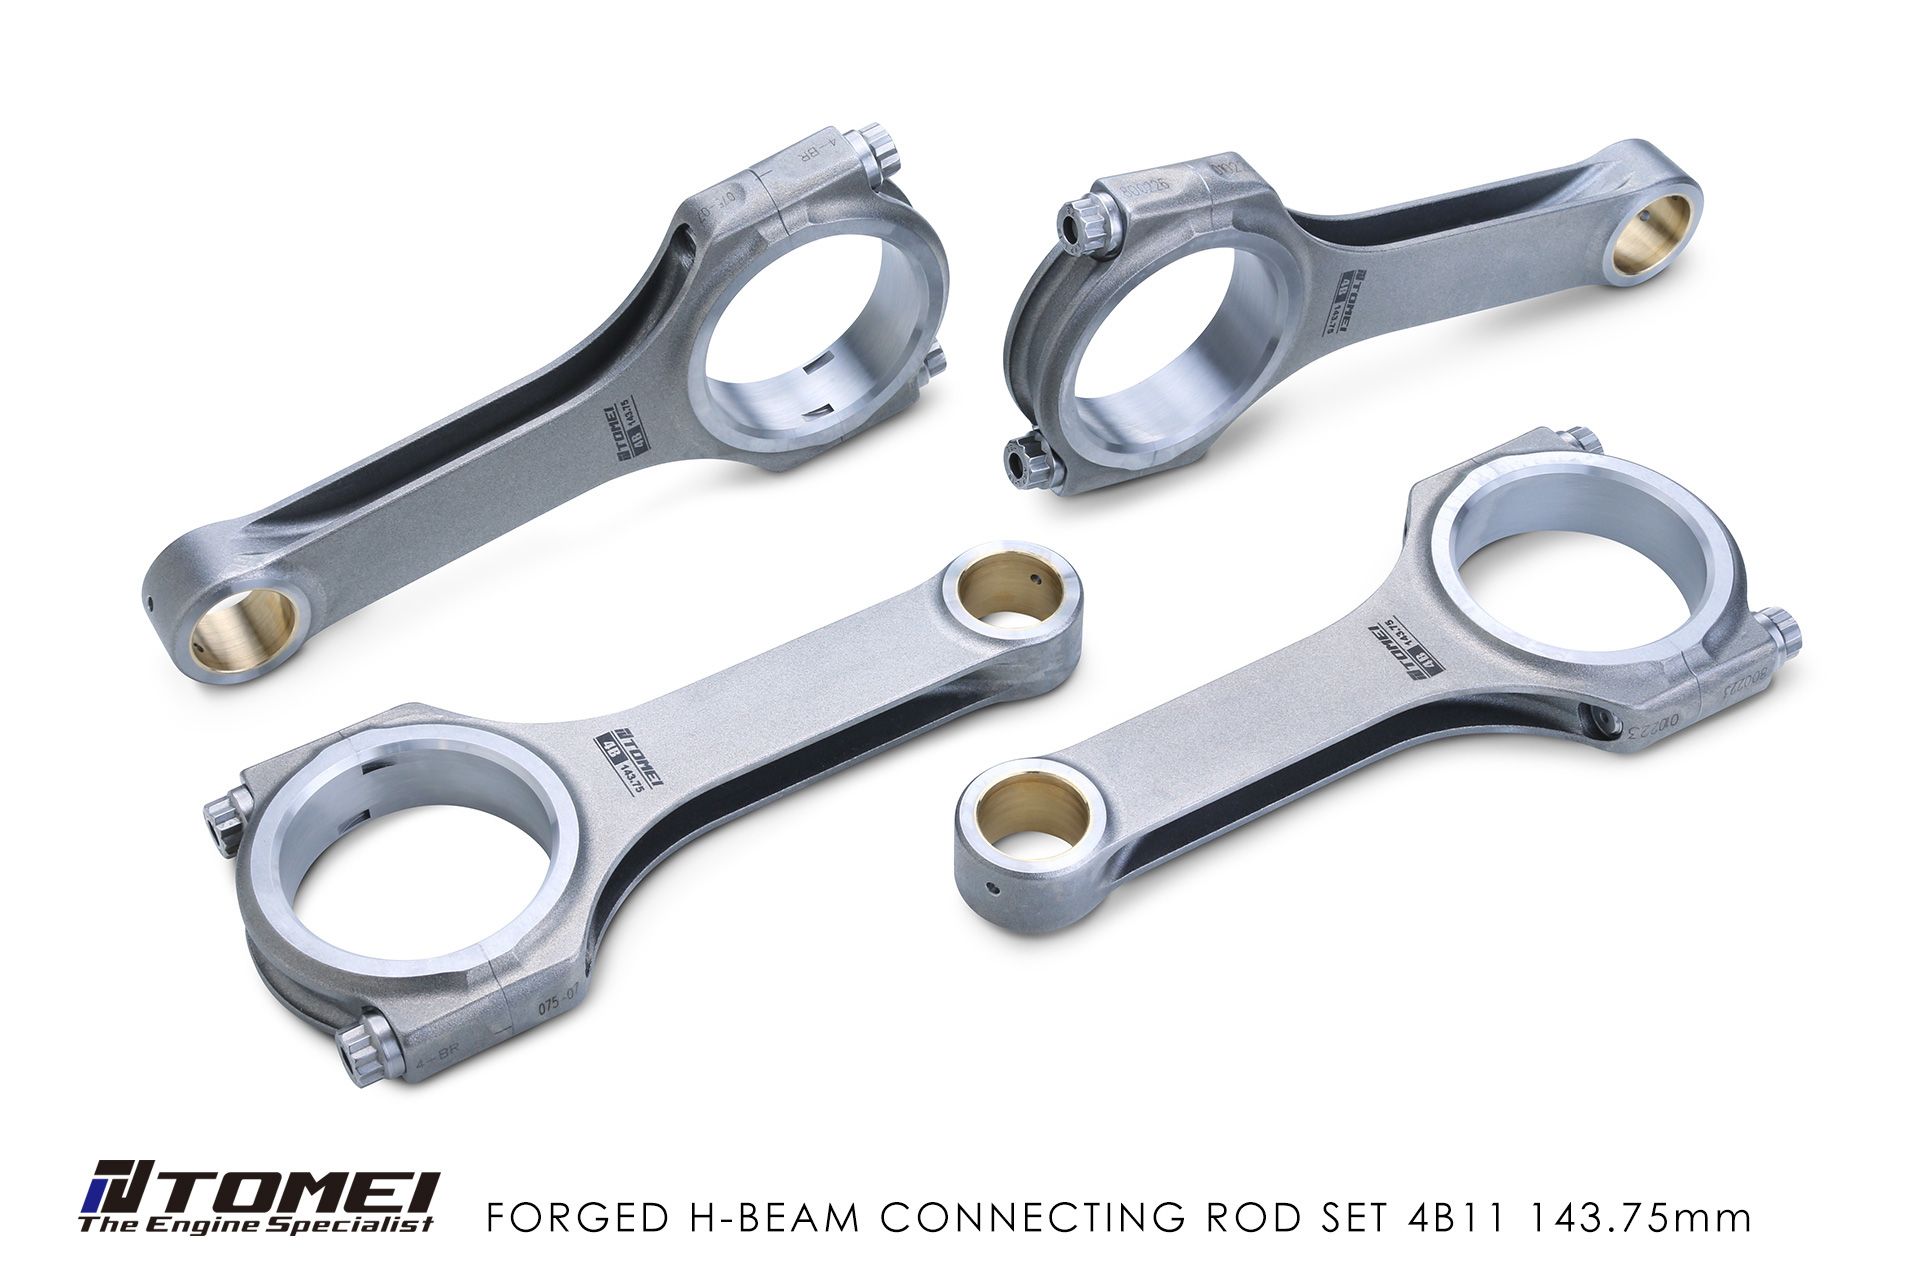 Tomei Forged H-Beam Connecting Rod Set 4B11 143.75mm